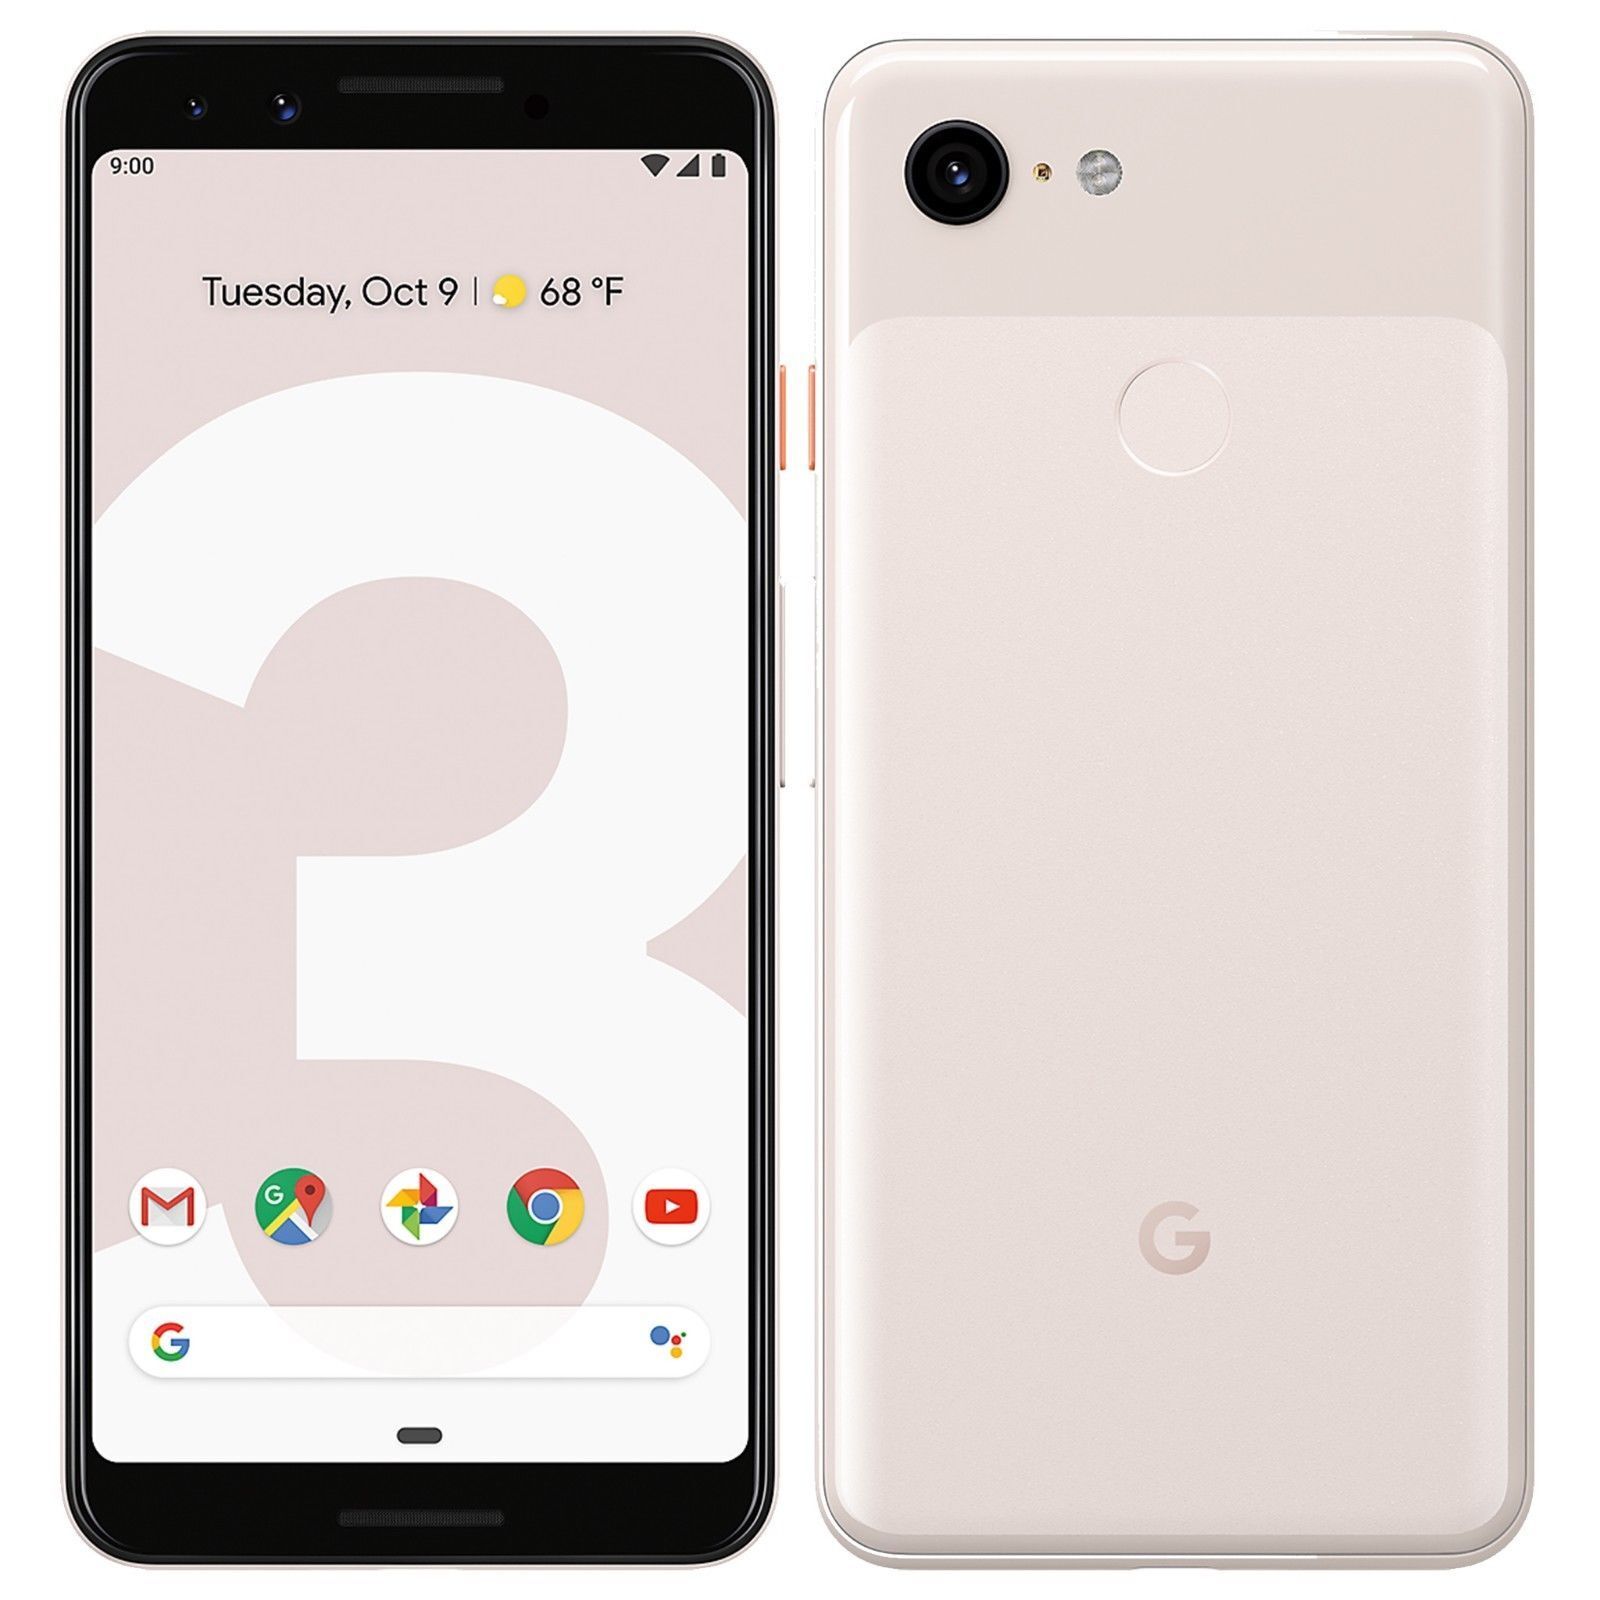 The Price of Google Pixel 3 64GB Pink 4GB RAM 5.5″ IP68 Octa-core Android Phone By FedEx | Google Pixel Phone